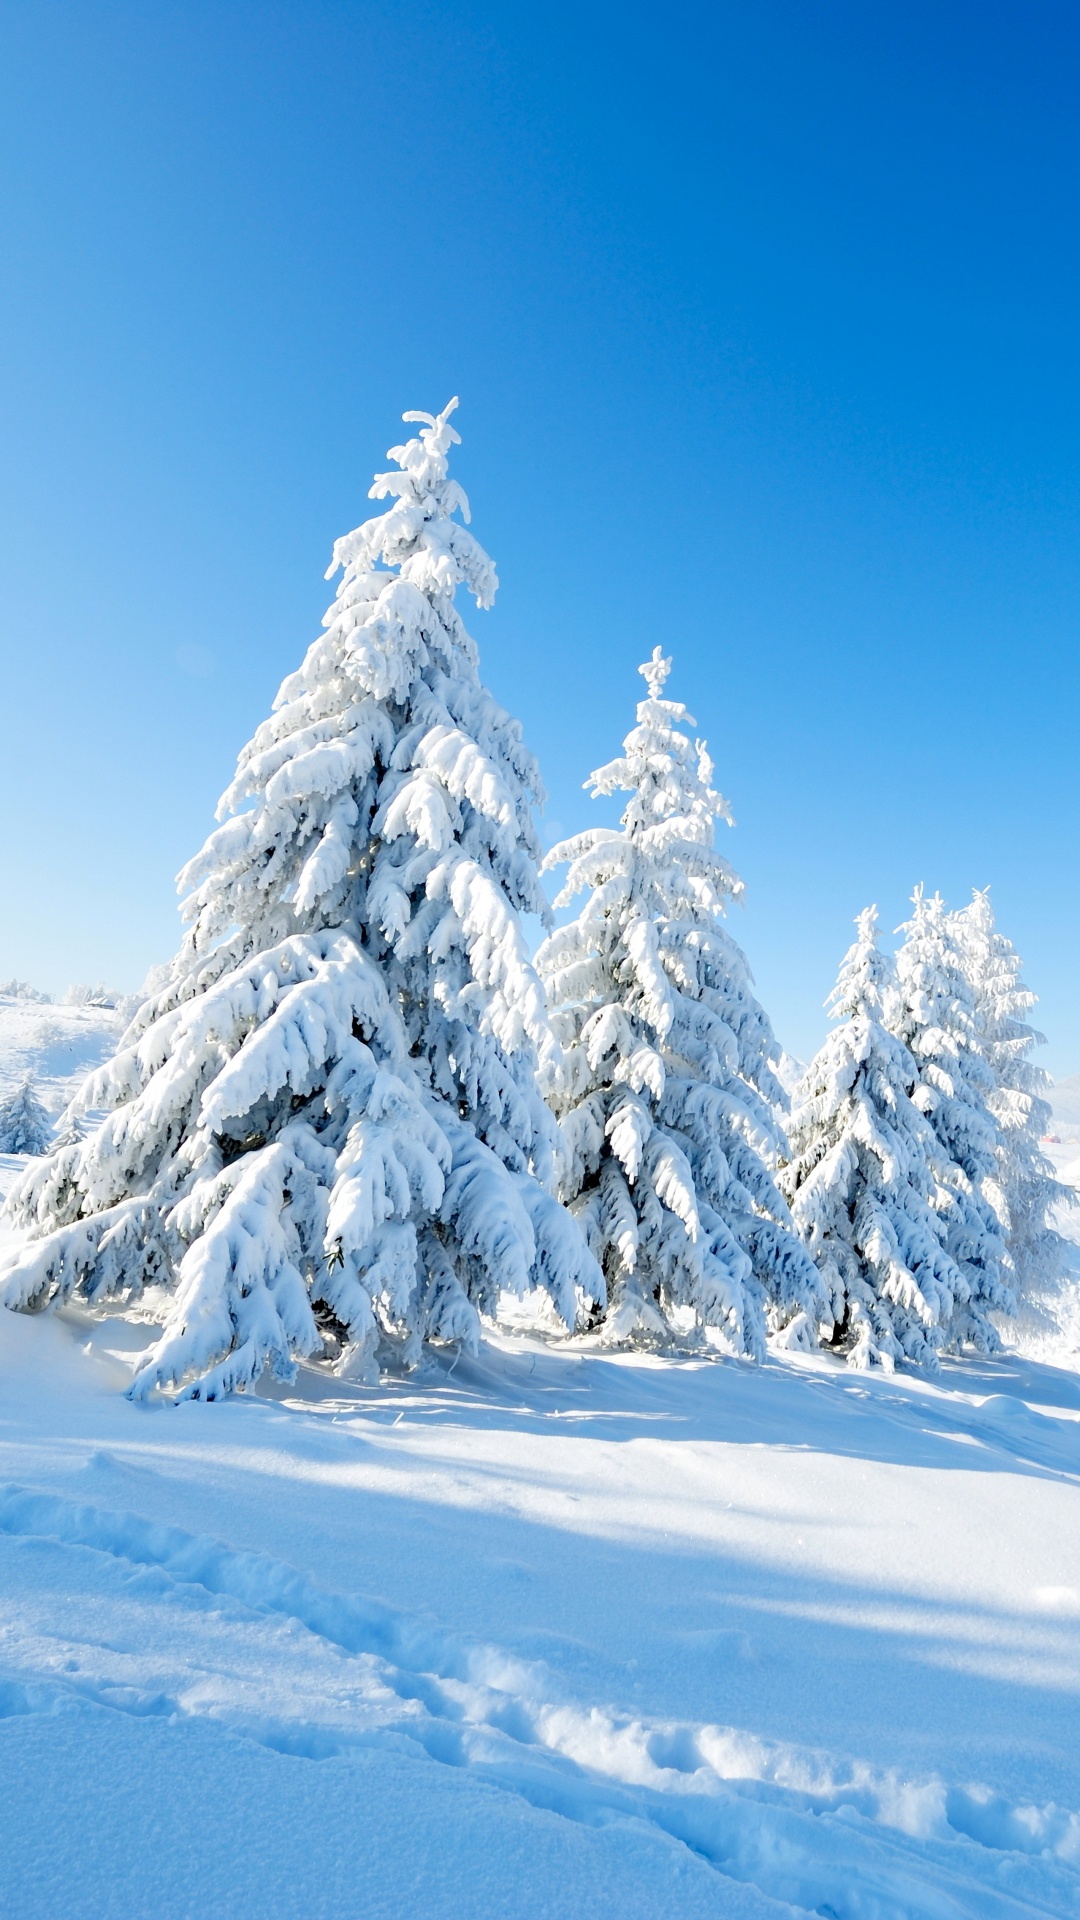 Snow Covered Pine Trees on Snow Covered Ground Under Blue Sky During Daytime. Wallpaper in 1080x1920 Resolution